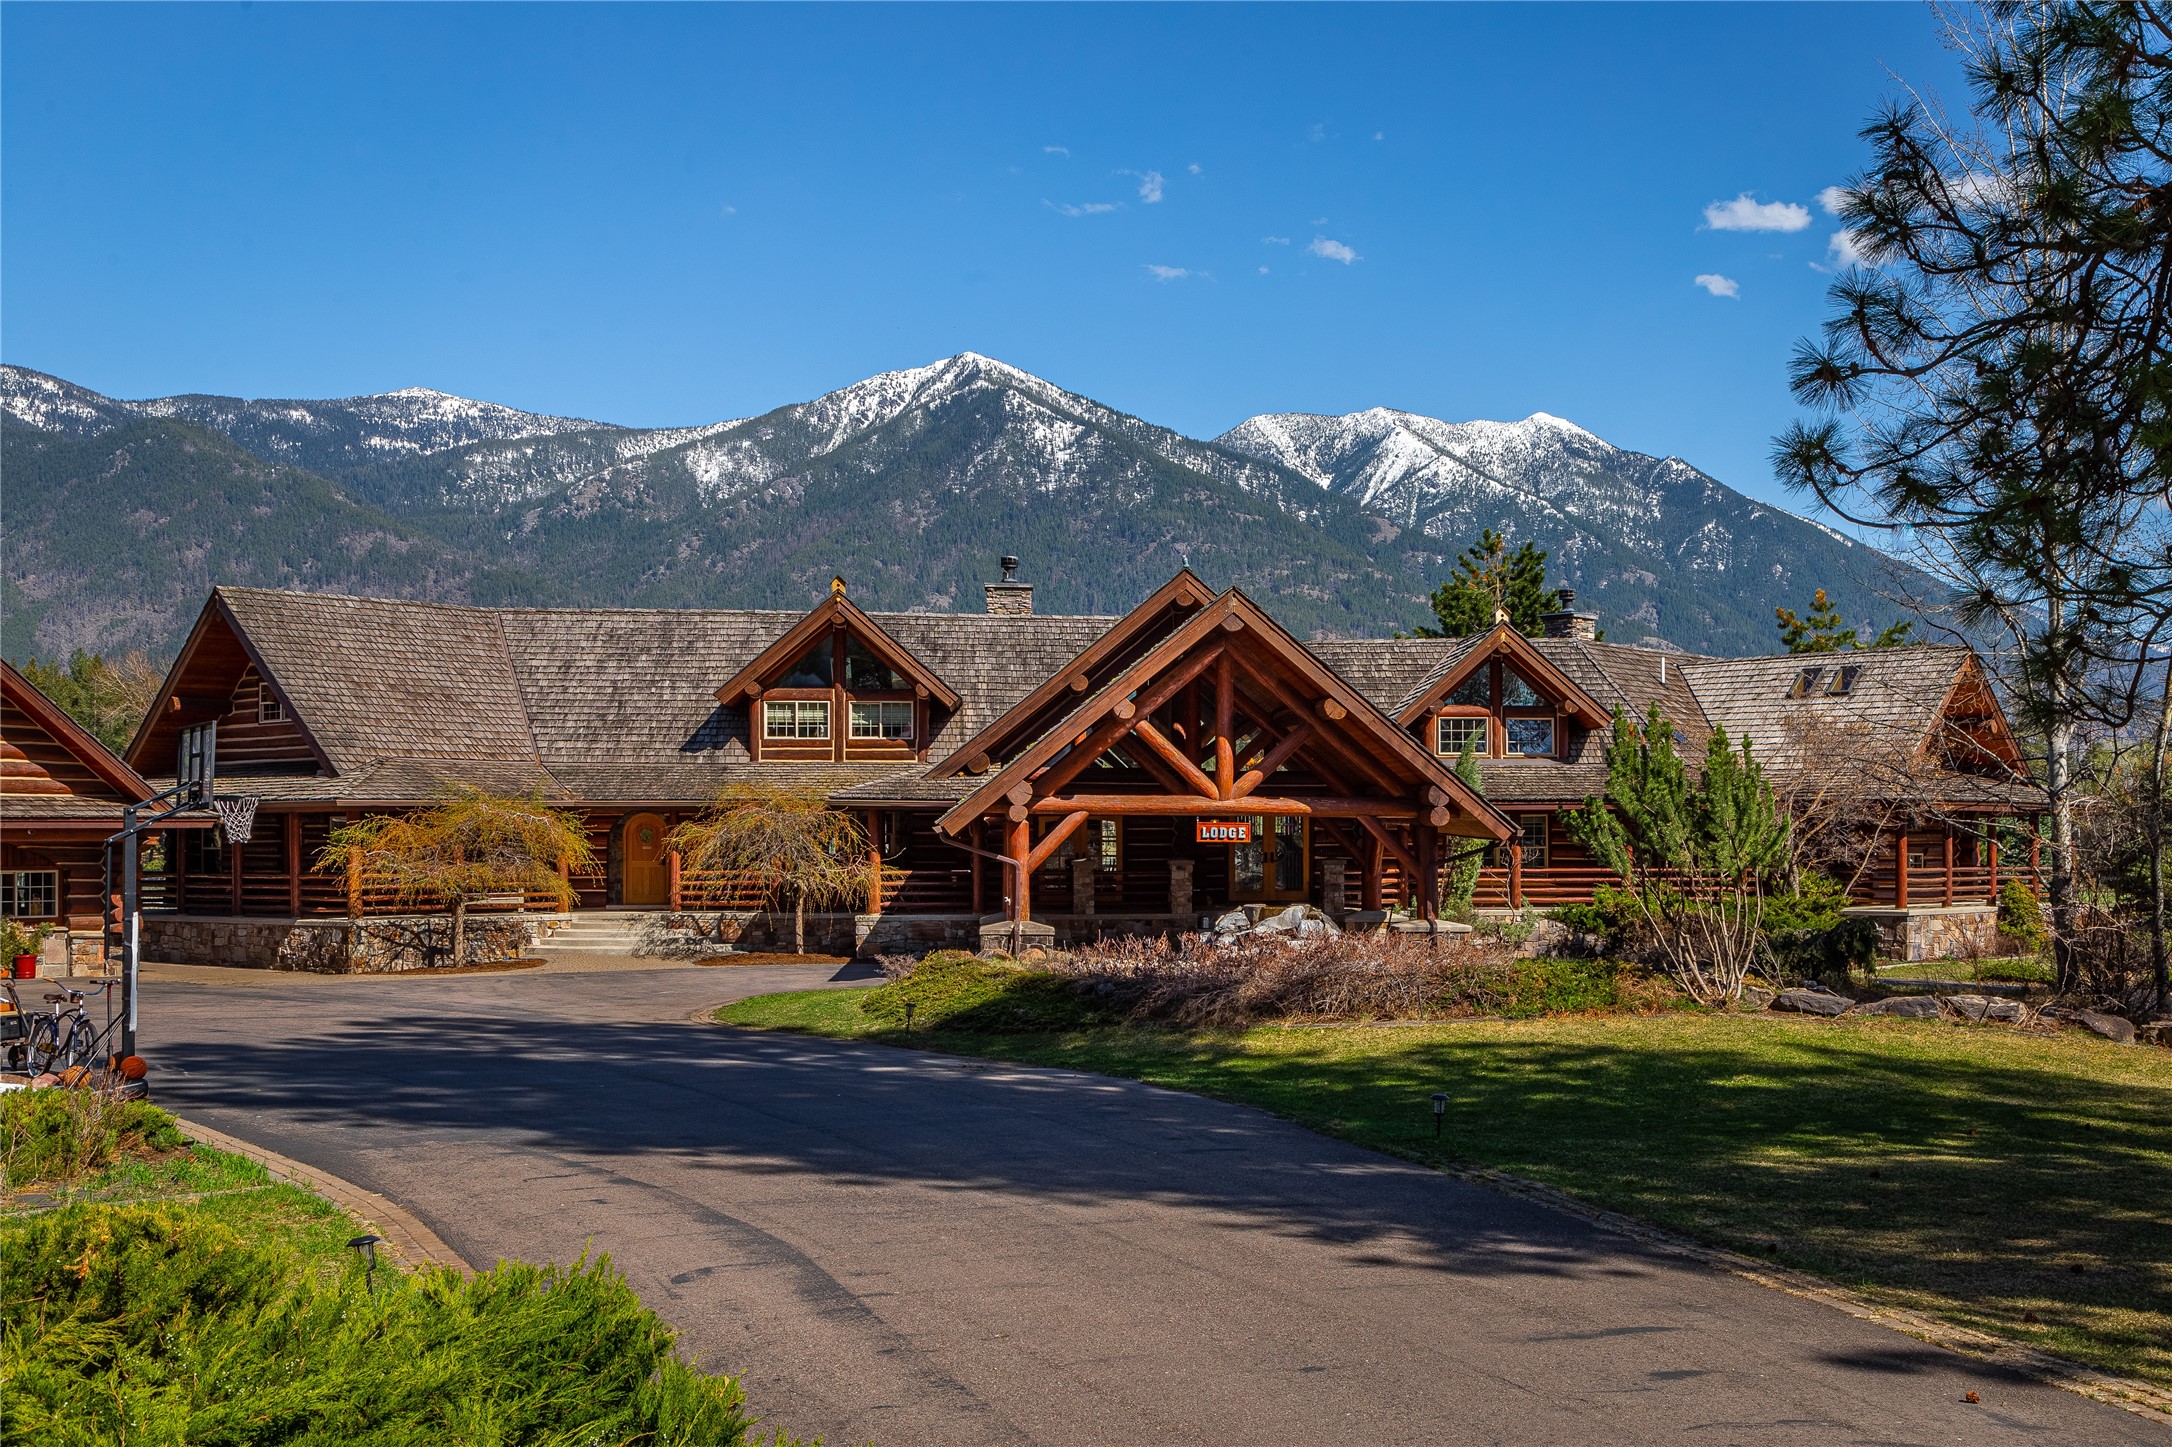 In the heart of the Flathead Valley find your sanctuary amidst 20 acres of towering pines with commanding views of the Columbia Mountains. The Lodge is a testament to craftsmanship spanning 7,000 sq ft, built of 18” hewn logs and stone, each detail a nod to the wild heart of Montana. This grand home is designed as a gathering space to bring together family and friends with 22’ ceilings, a large open concept kitchen, massive double sided river rock fireplace and a downstairs movie/game room. The property boasts three additional complimentary buildings, each with their own accommodations, this gives the ability to host large groups and adds to the value of this prized estate. Take in nature, local wildlife, the mountains and alpenglow all framed beautifully from the back deck evoking the notion this isn’t just land, it’s a Montana legacy. The property is unzoned, inviting your dreams! The Feature Sheet is a must see. Call Sonja Burgard 406.871.0372 or your real estate professional today. See Floor Plans under "Documents"
Offered fully furnished minus small seller exculsion list.